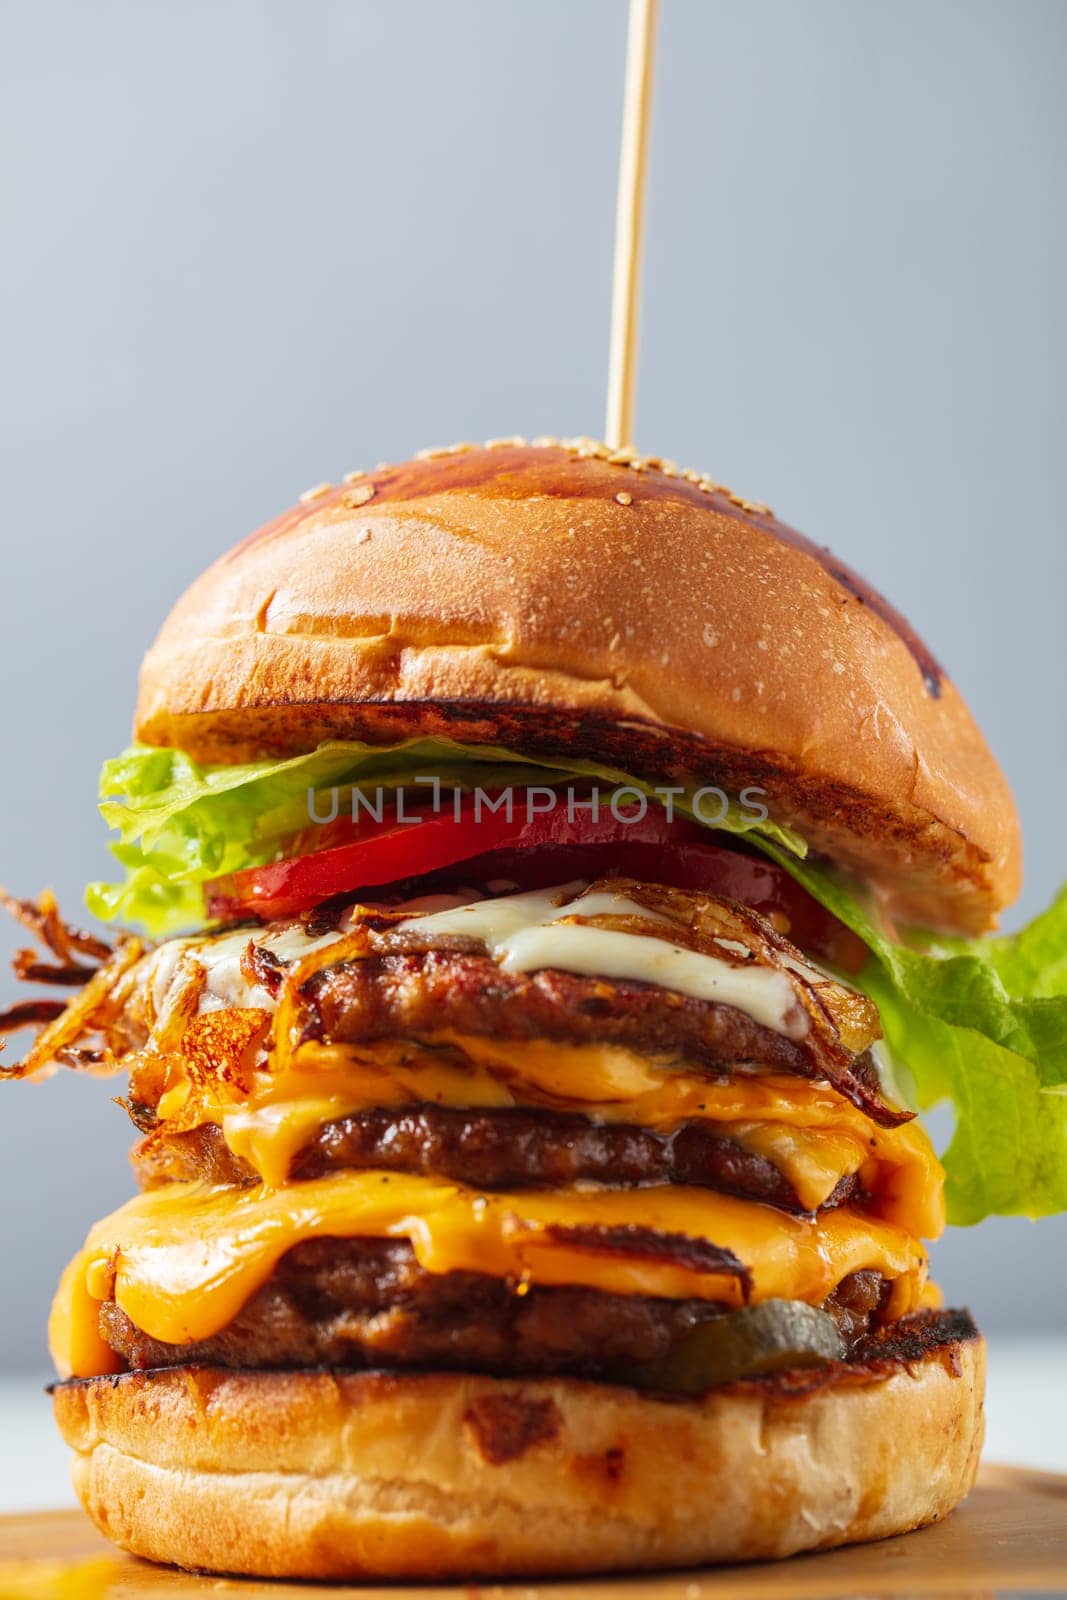 Loaded cheeseburgers three triple, stacked patties stacked high with layers of cheese, lettuce, and tomato. Tall cheeseburger by senkaya